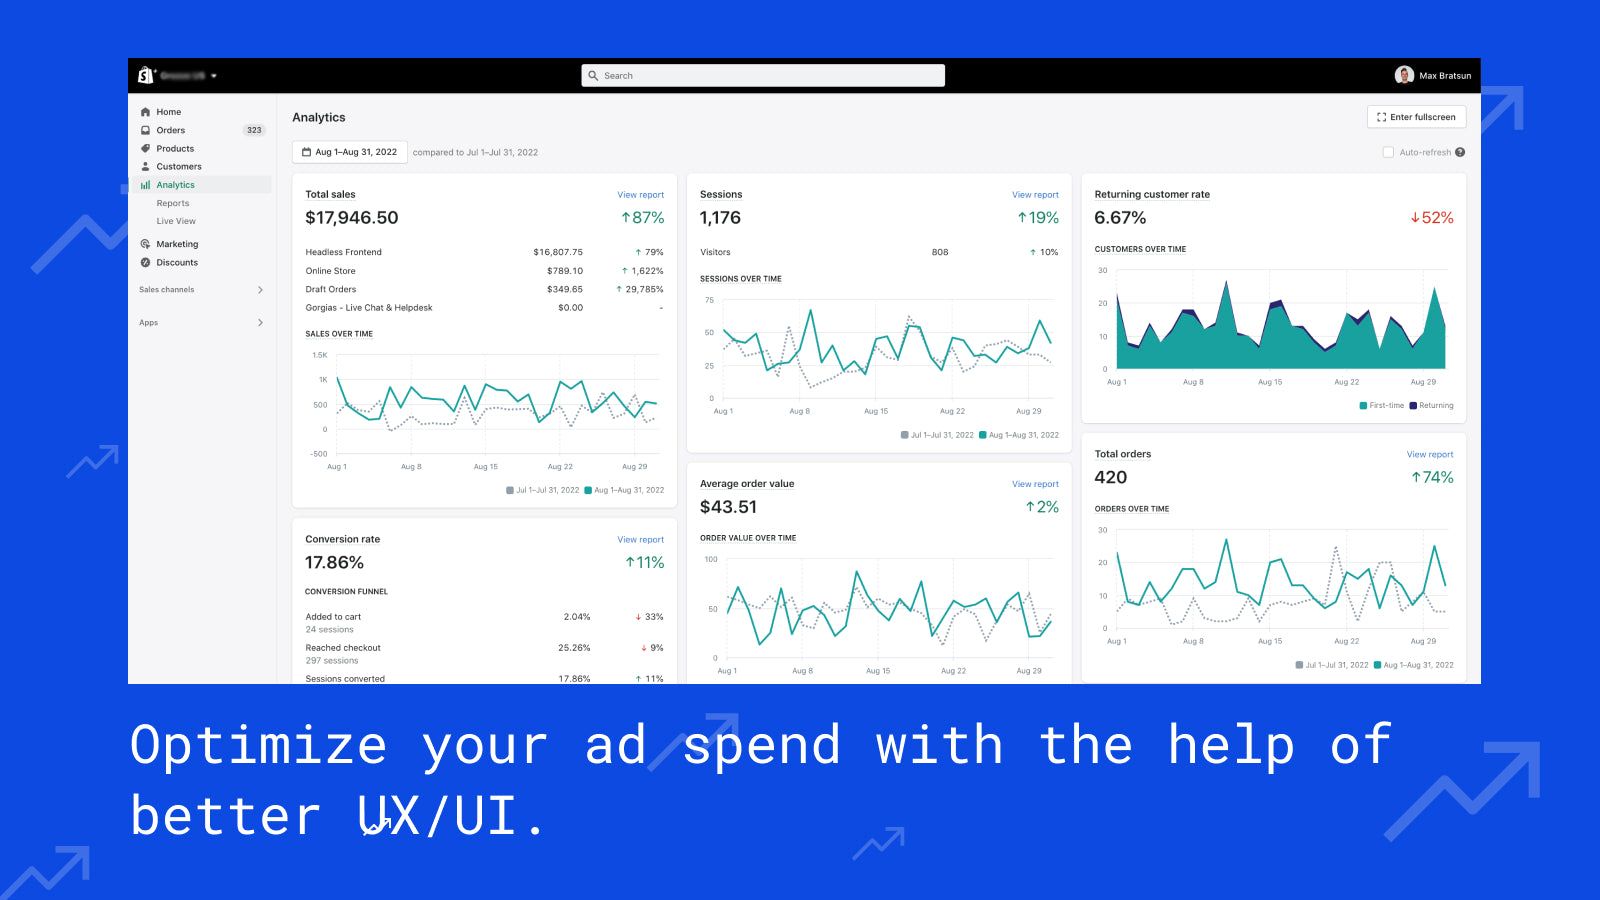 Optimize your ad spend with the help of better UX/UI.